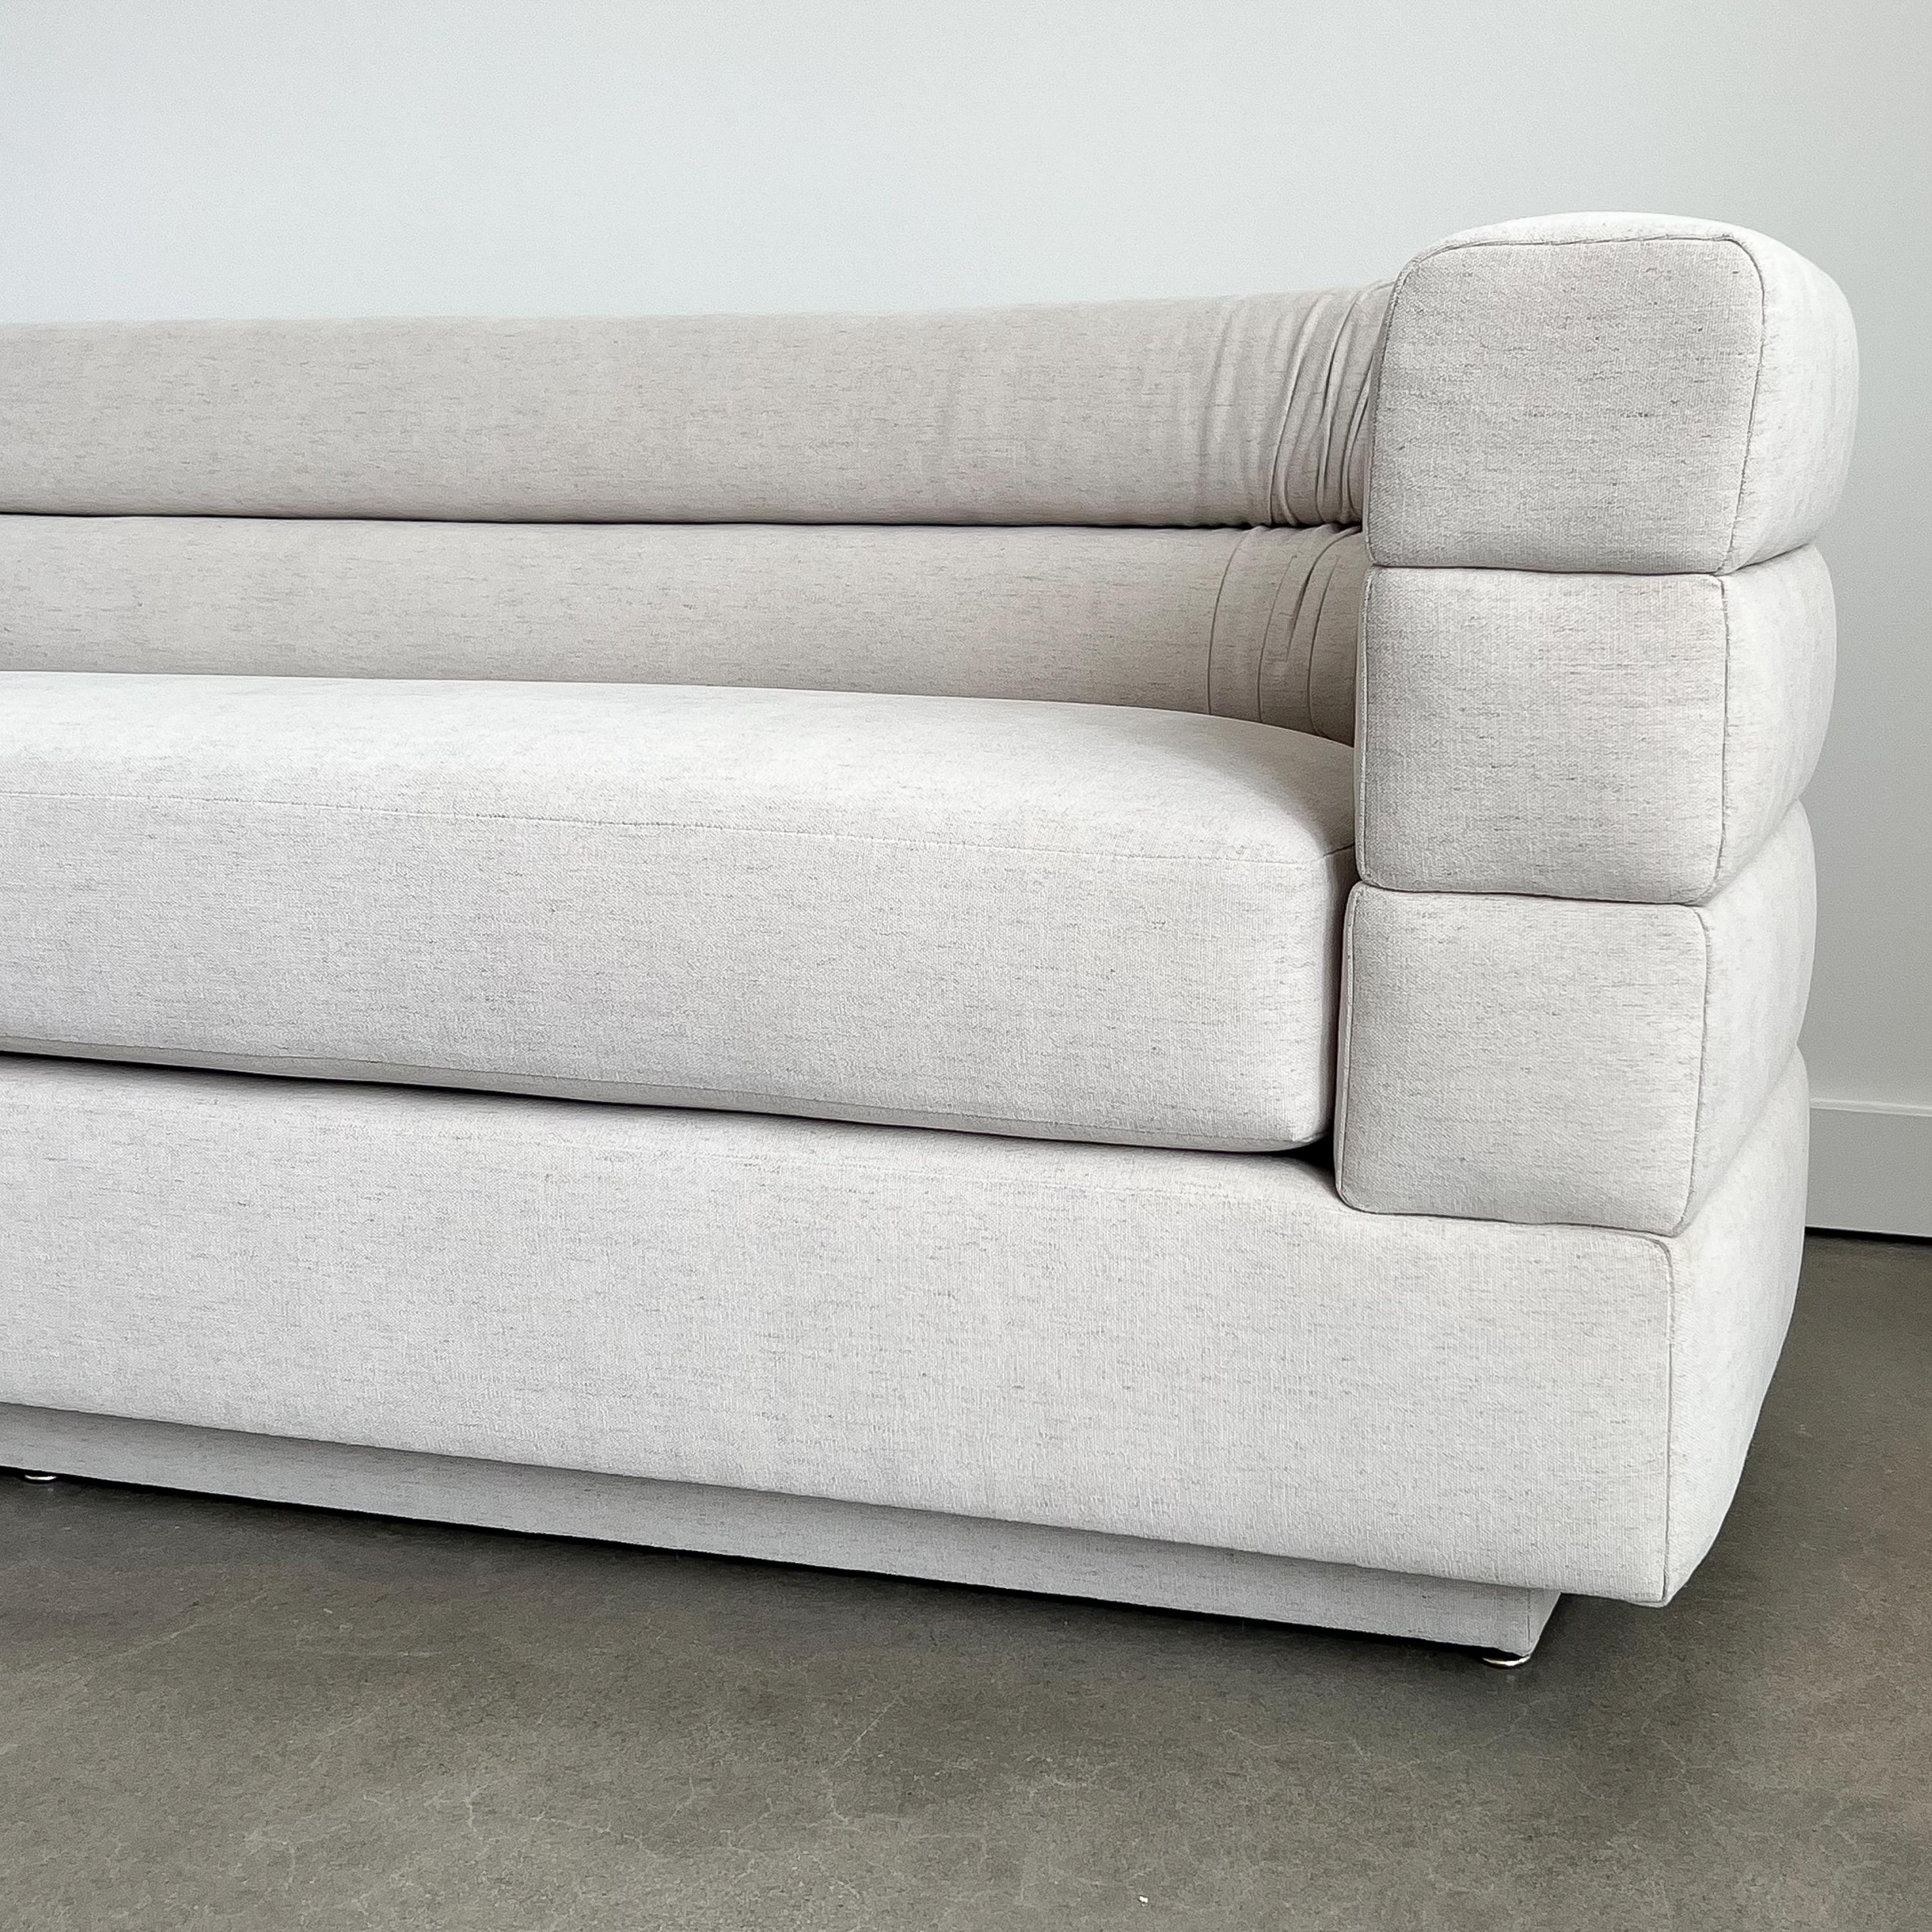 Interior Crafts Channeled Back Two Piece Sofa by Richard Himmel 7